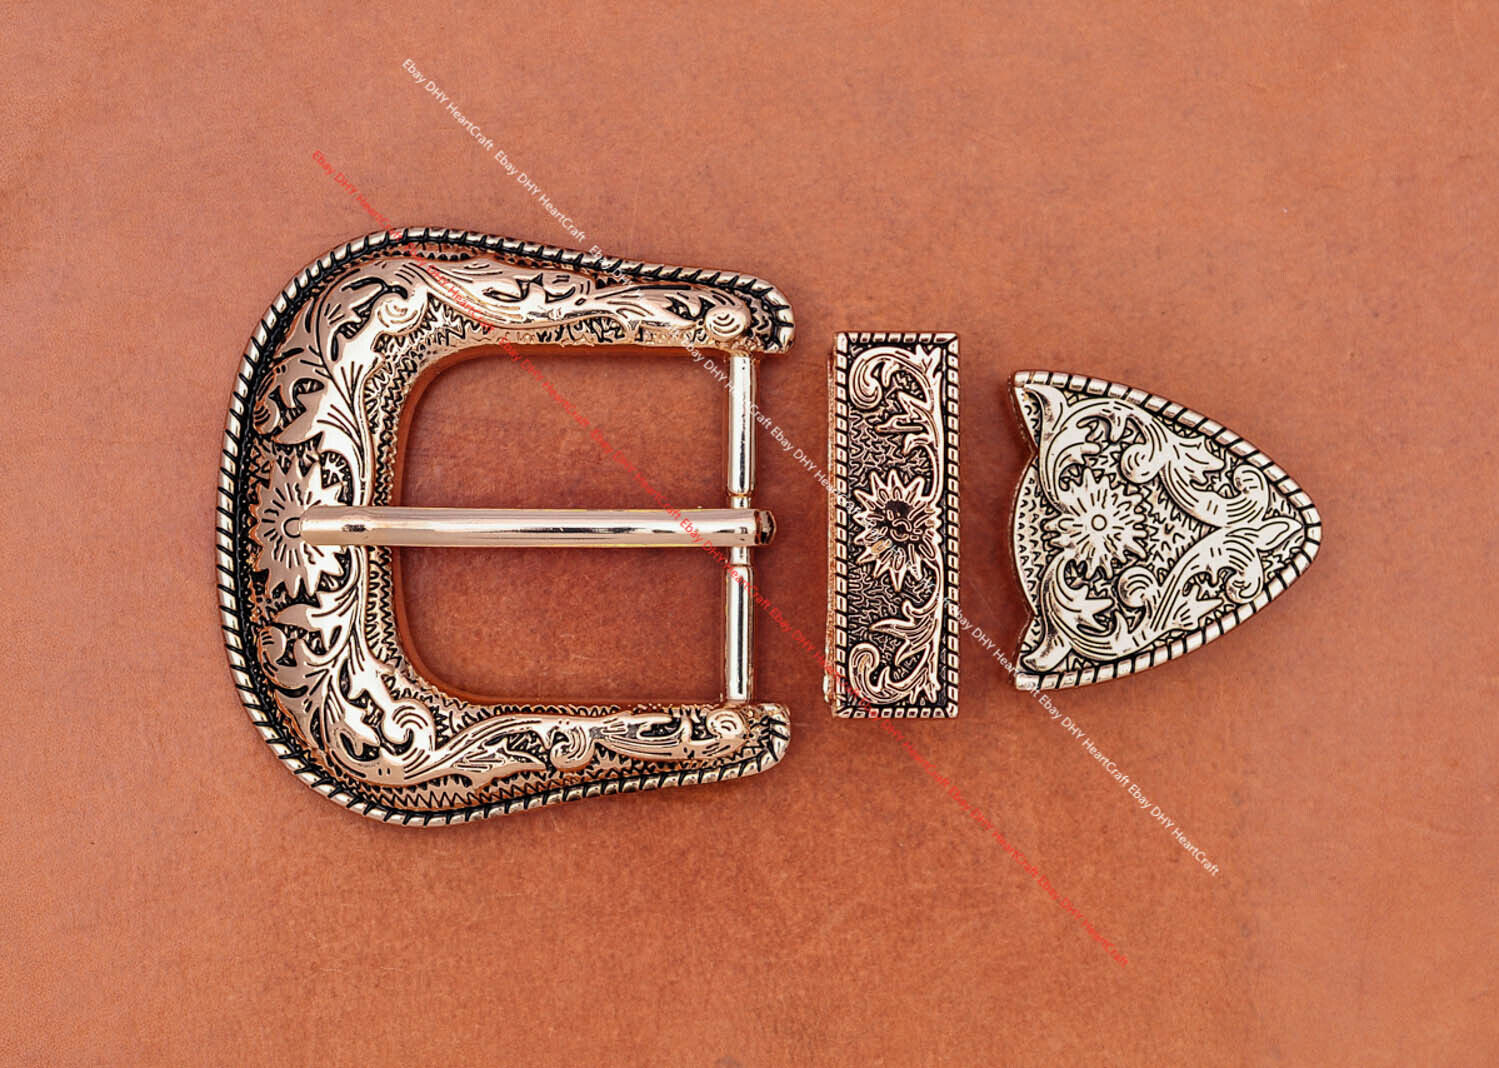 Heavy Gold Western Cowboy Belt Buckle 3 Piece Set Floral Carved Unisex 1-1/2" Unbranded Does not apply - фотография #11